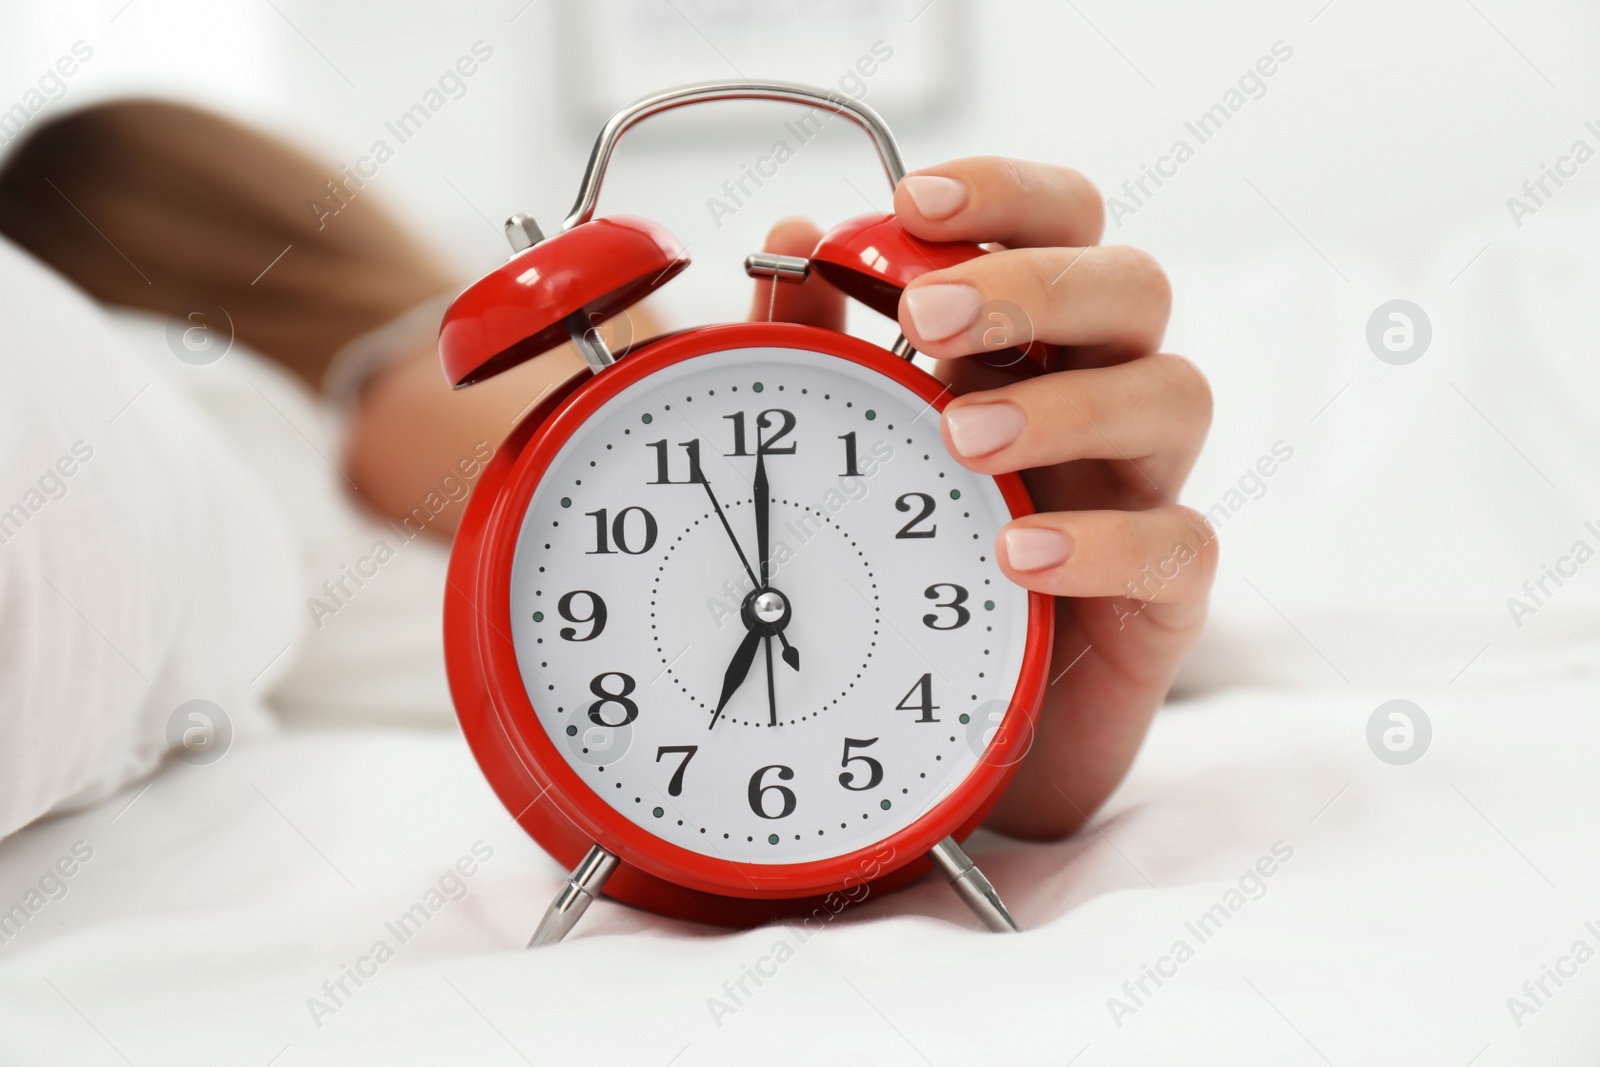 Photo of Woman turning off alarm clock in bedroom